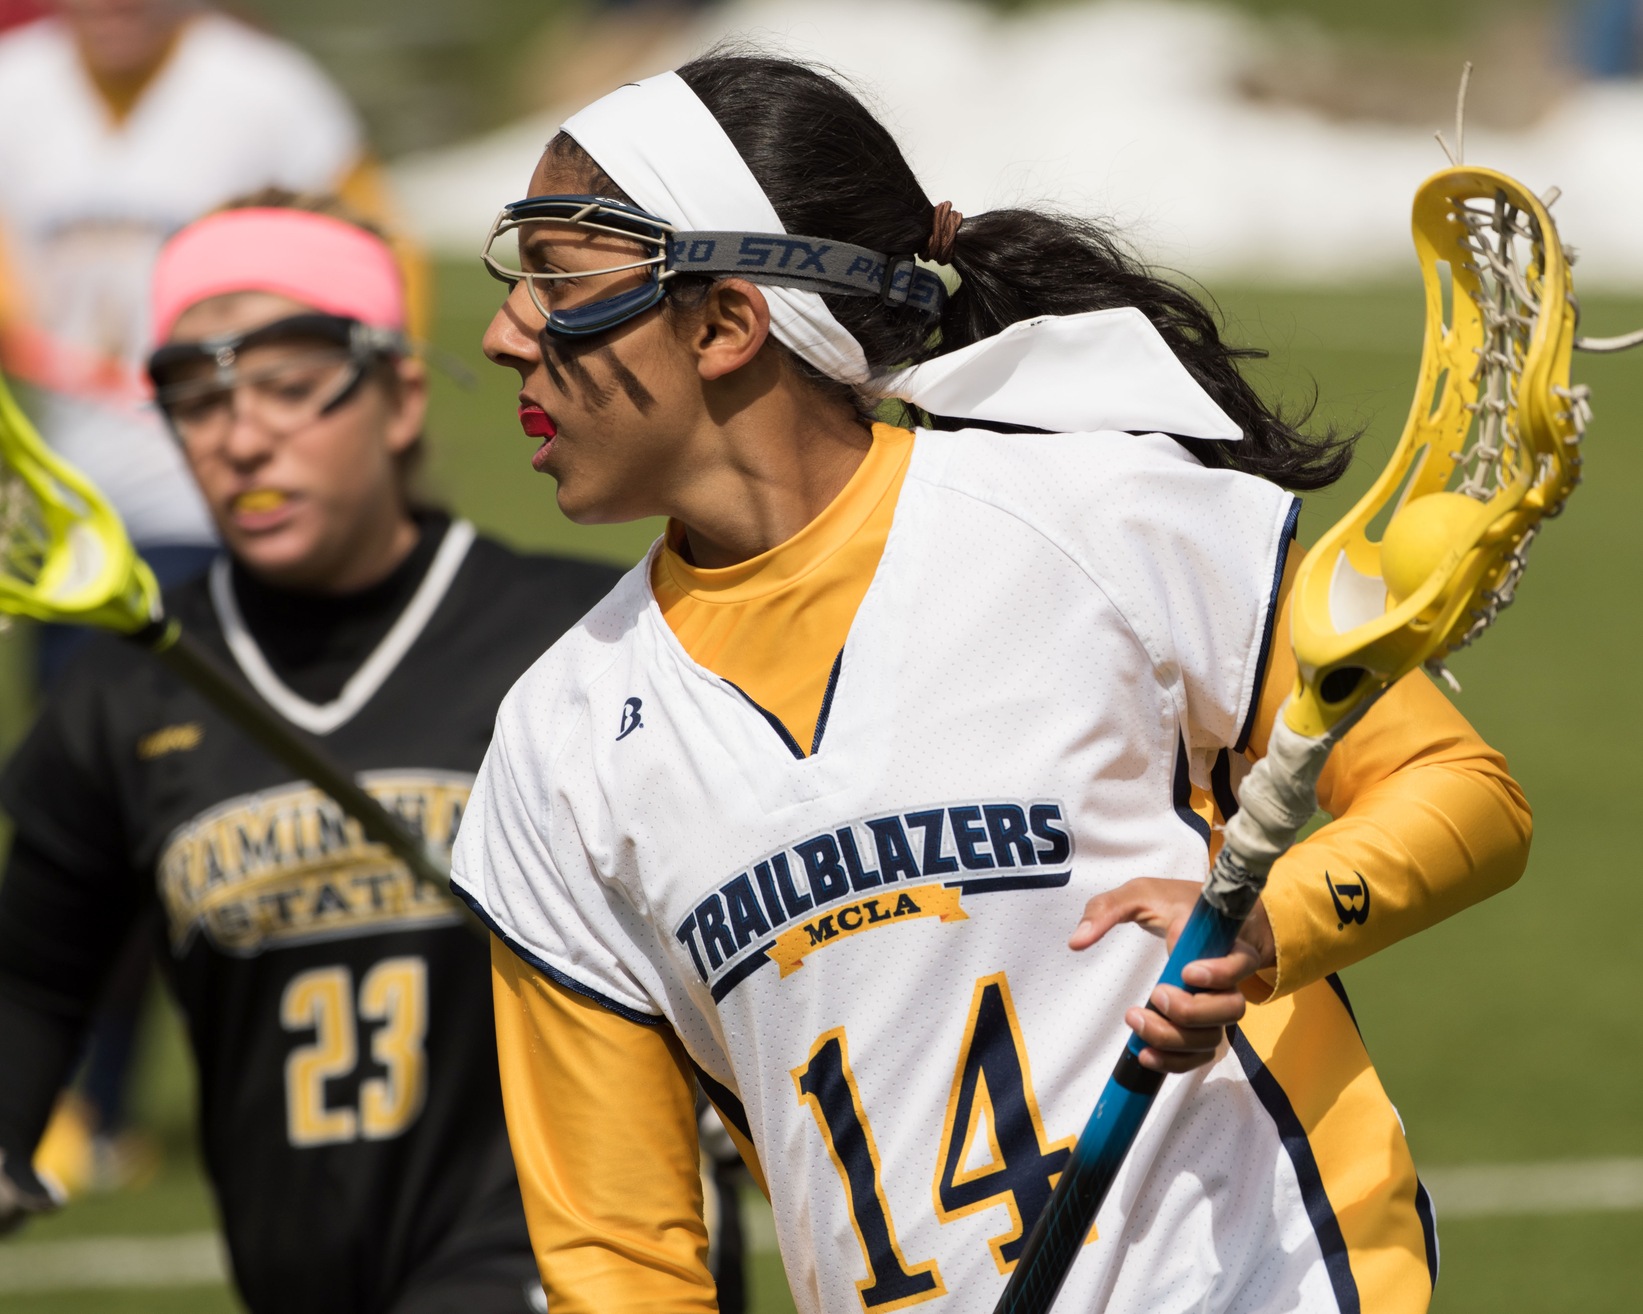 Caney scores four goals, but Trailblazer lacrosse drops nail biter to SVC 12-11 in non conference action